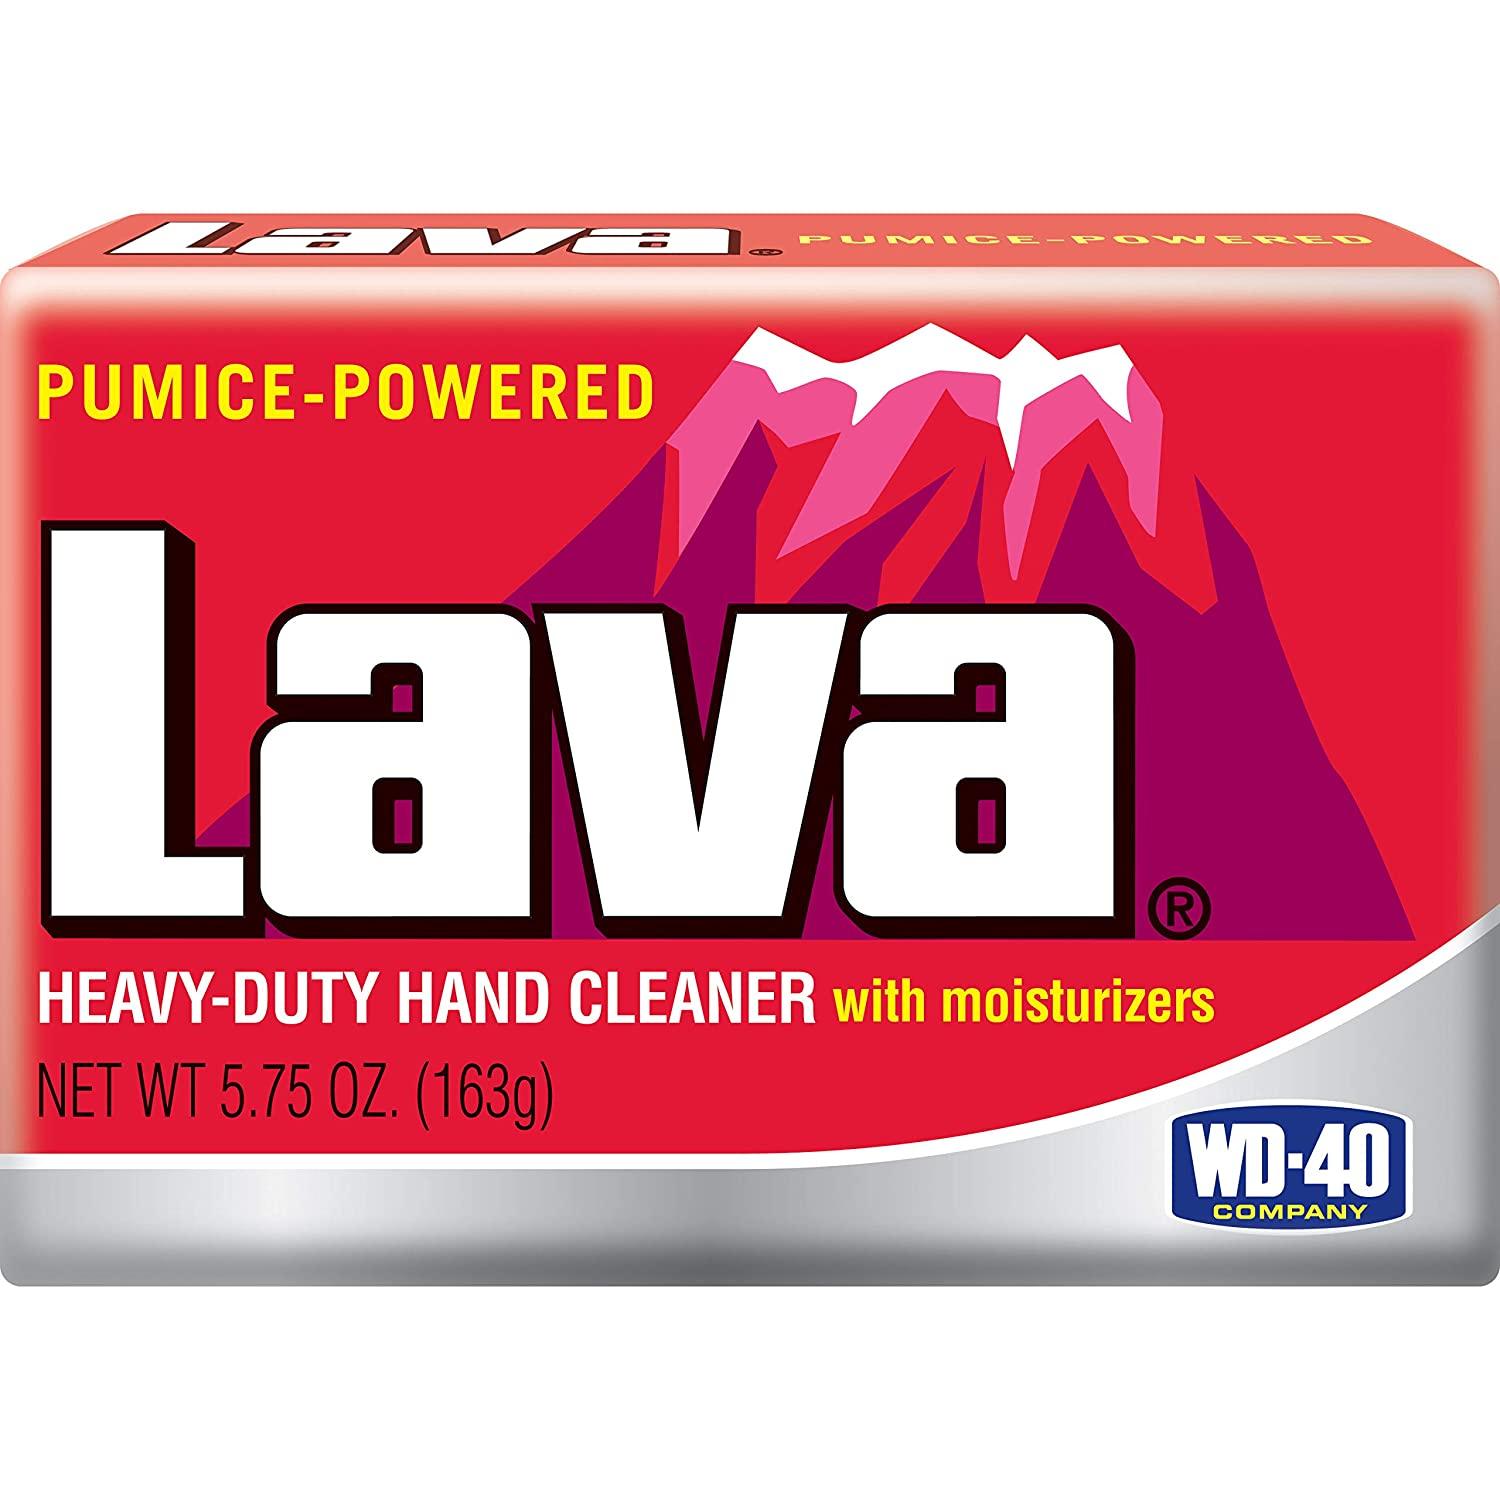 Lava Heavy-Duty Hand Cleaner with Moisturizers for $1.29